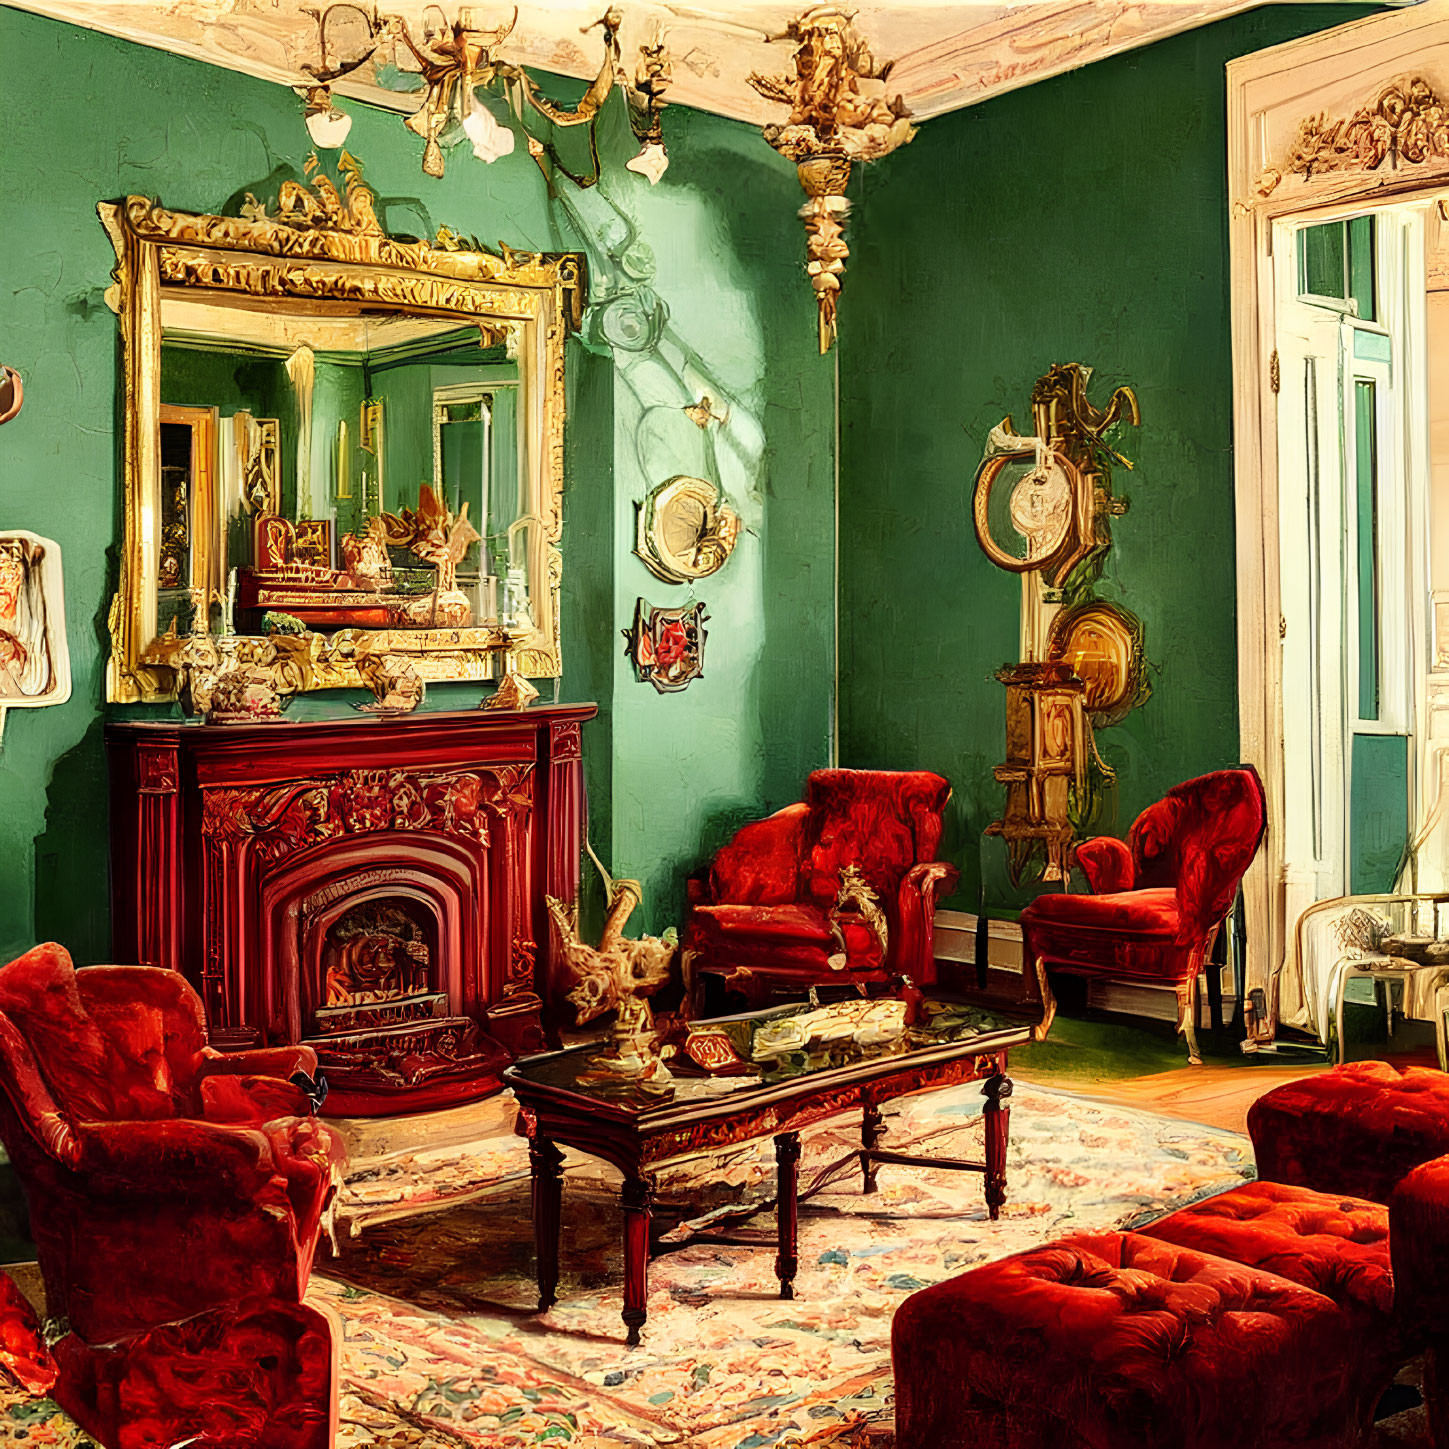 Luxurious Vintage Room with Red Furniture, Gold Mirror, Fireplace, Chandelier, Green Walls, Art